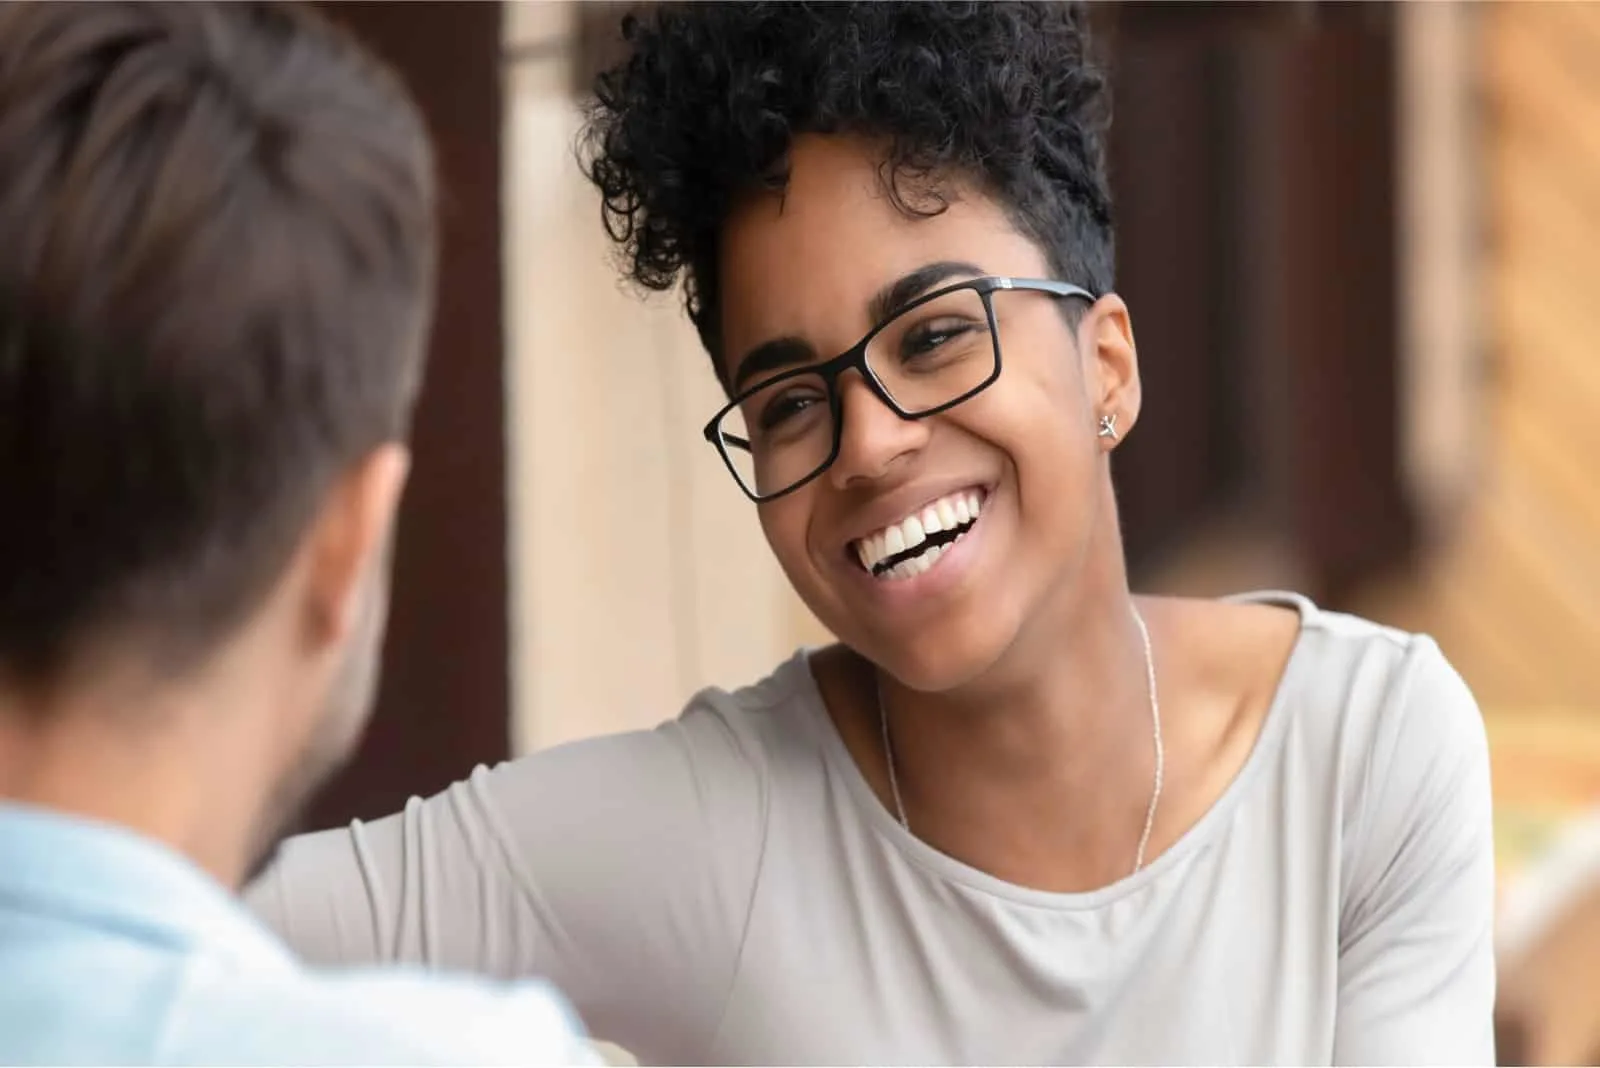 woman with curly hair smiling while looking at man